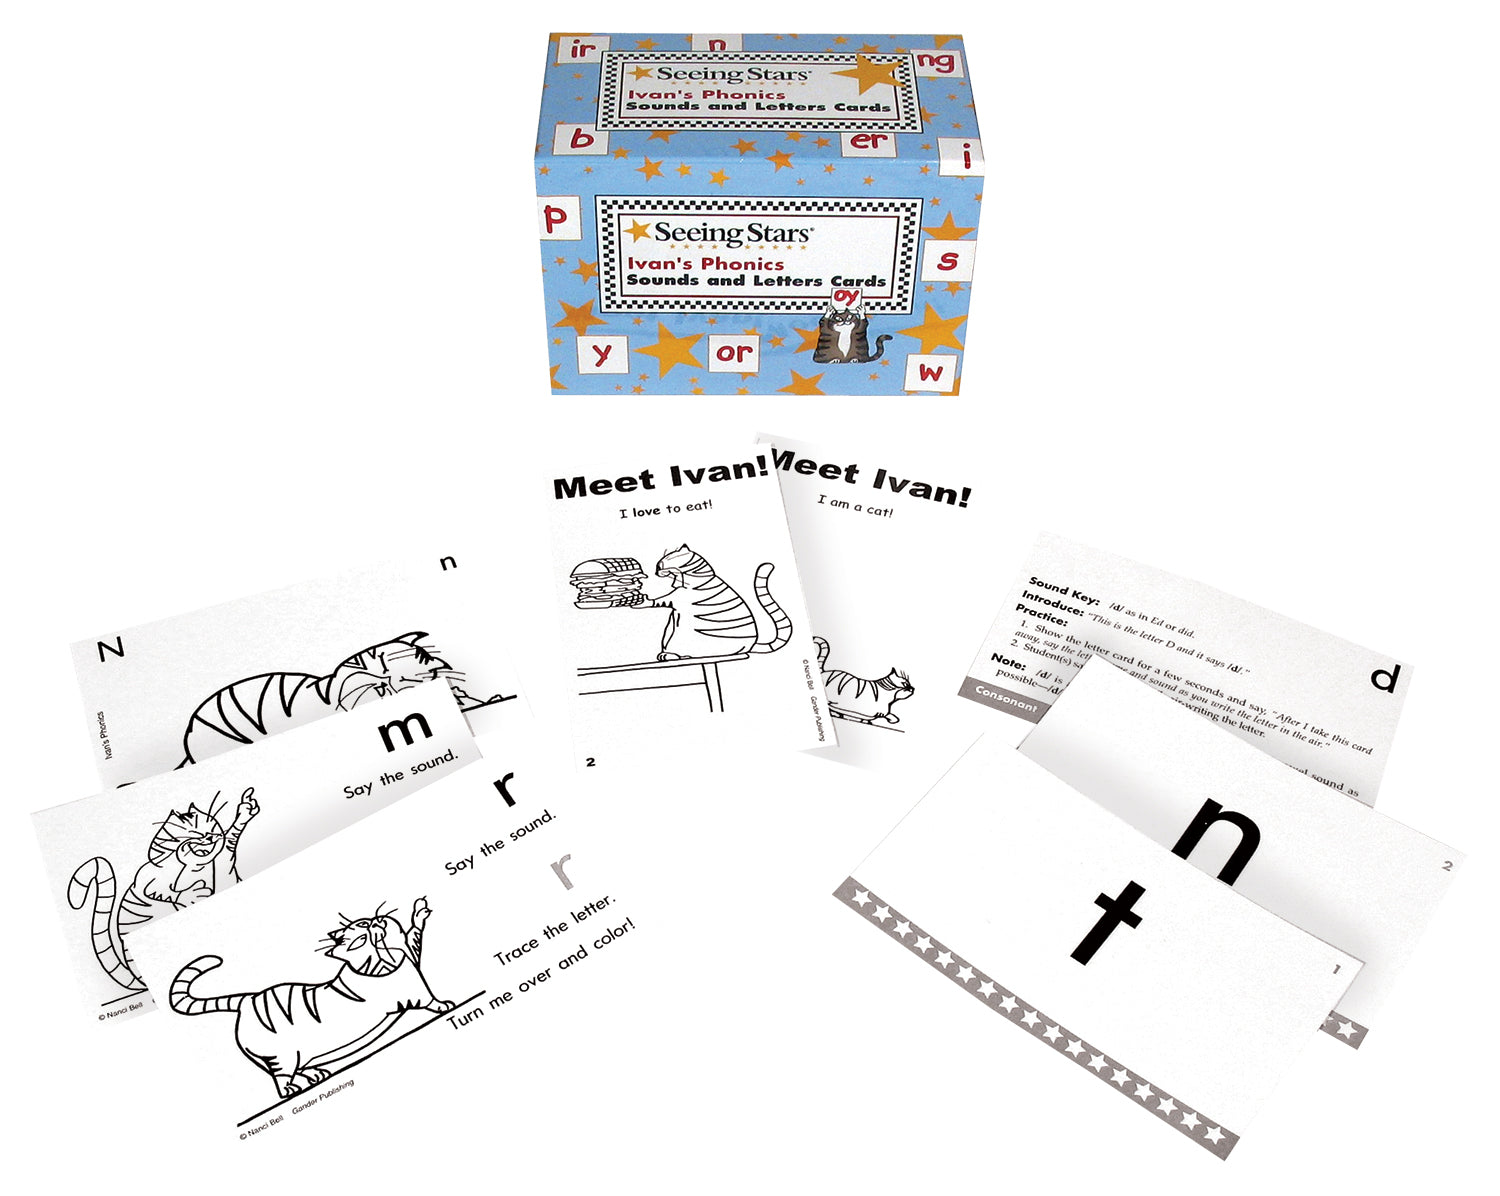 Ivan's Phonics Sounds and Letters Cards